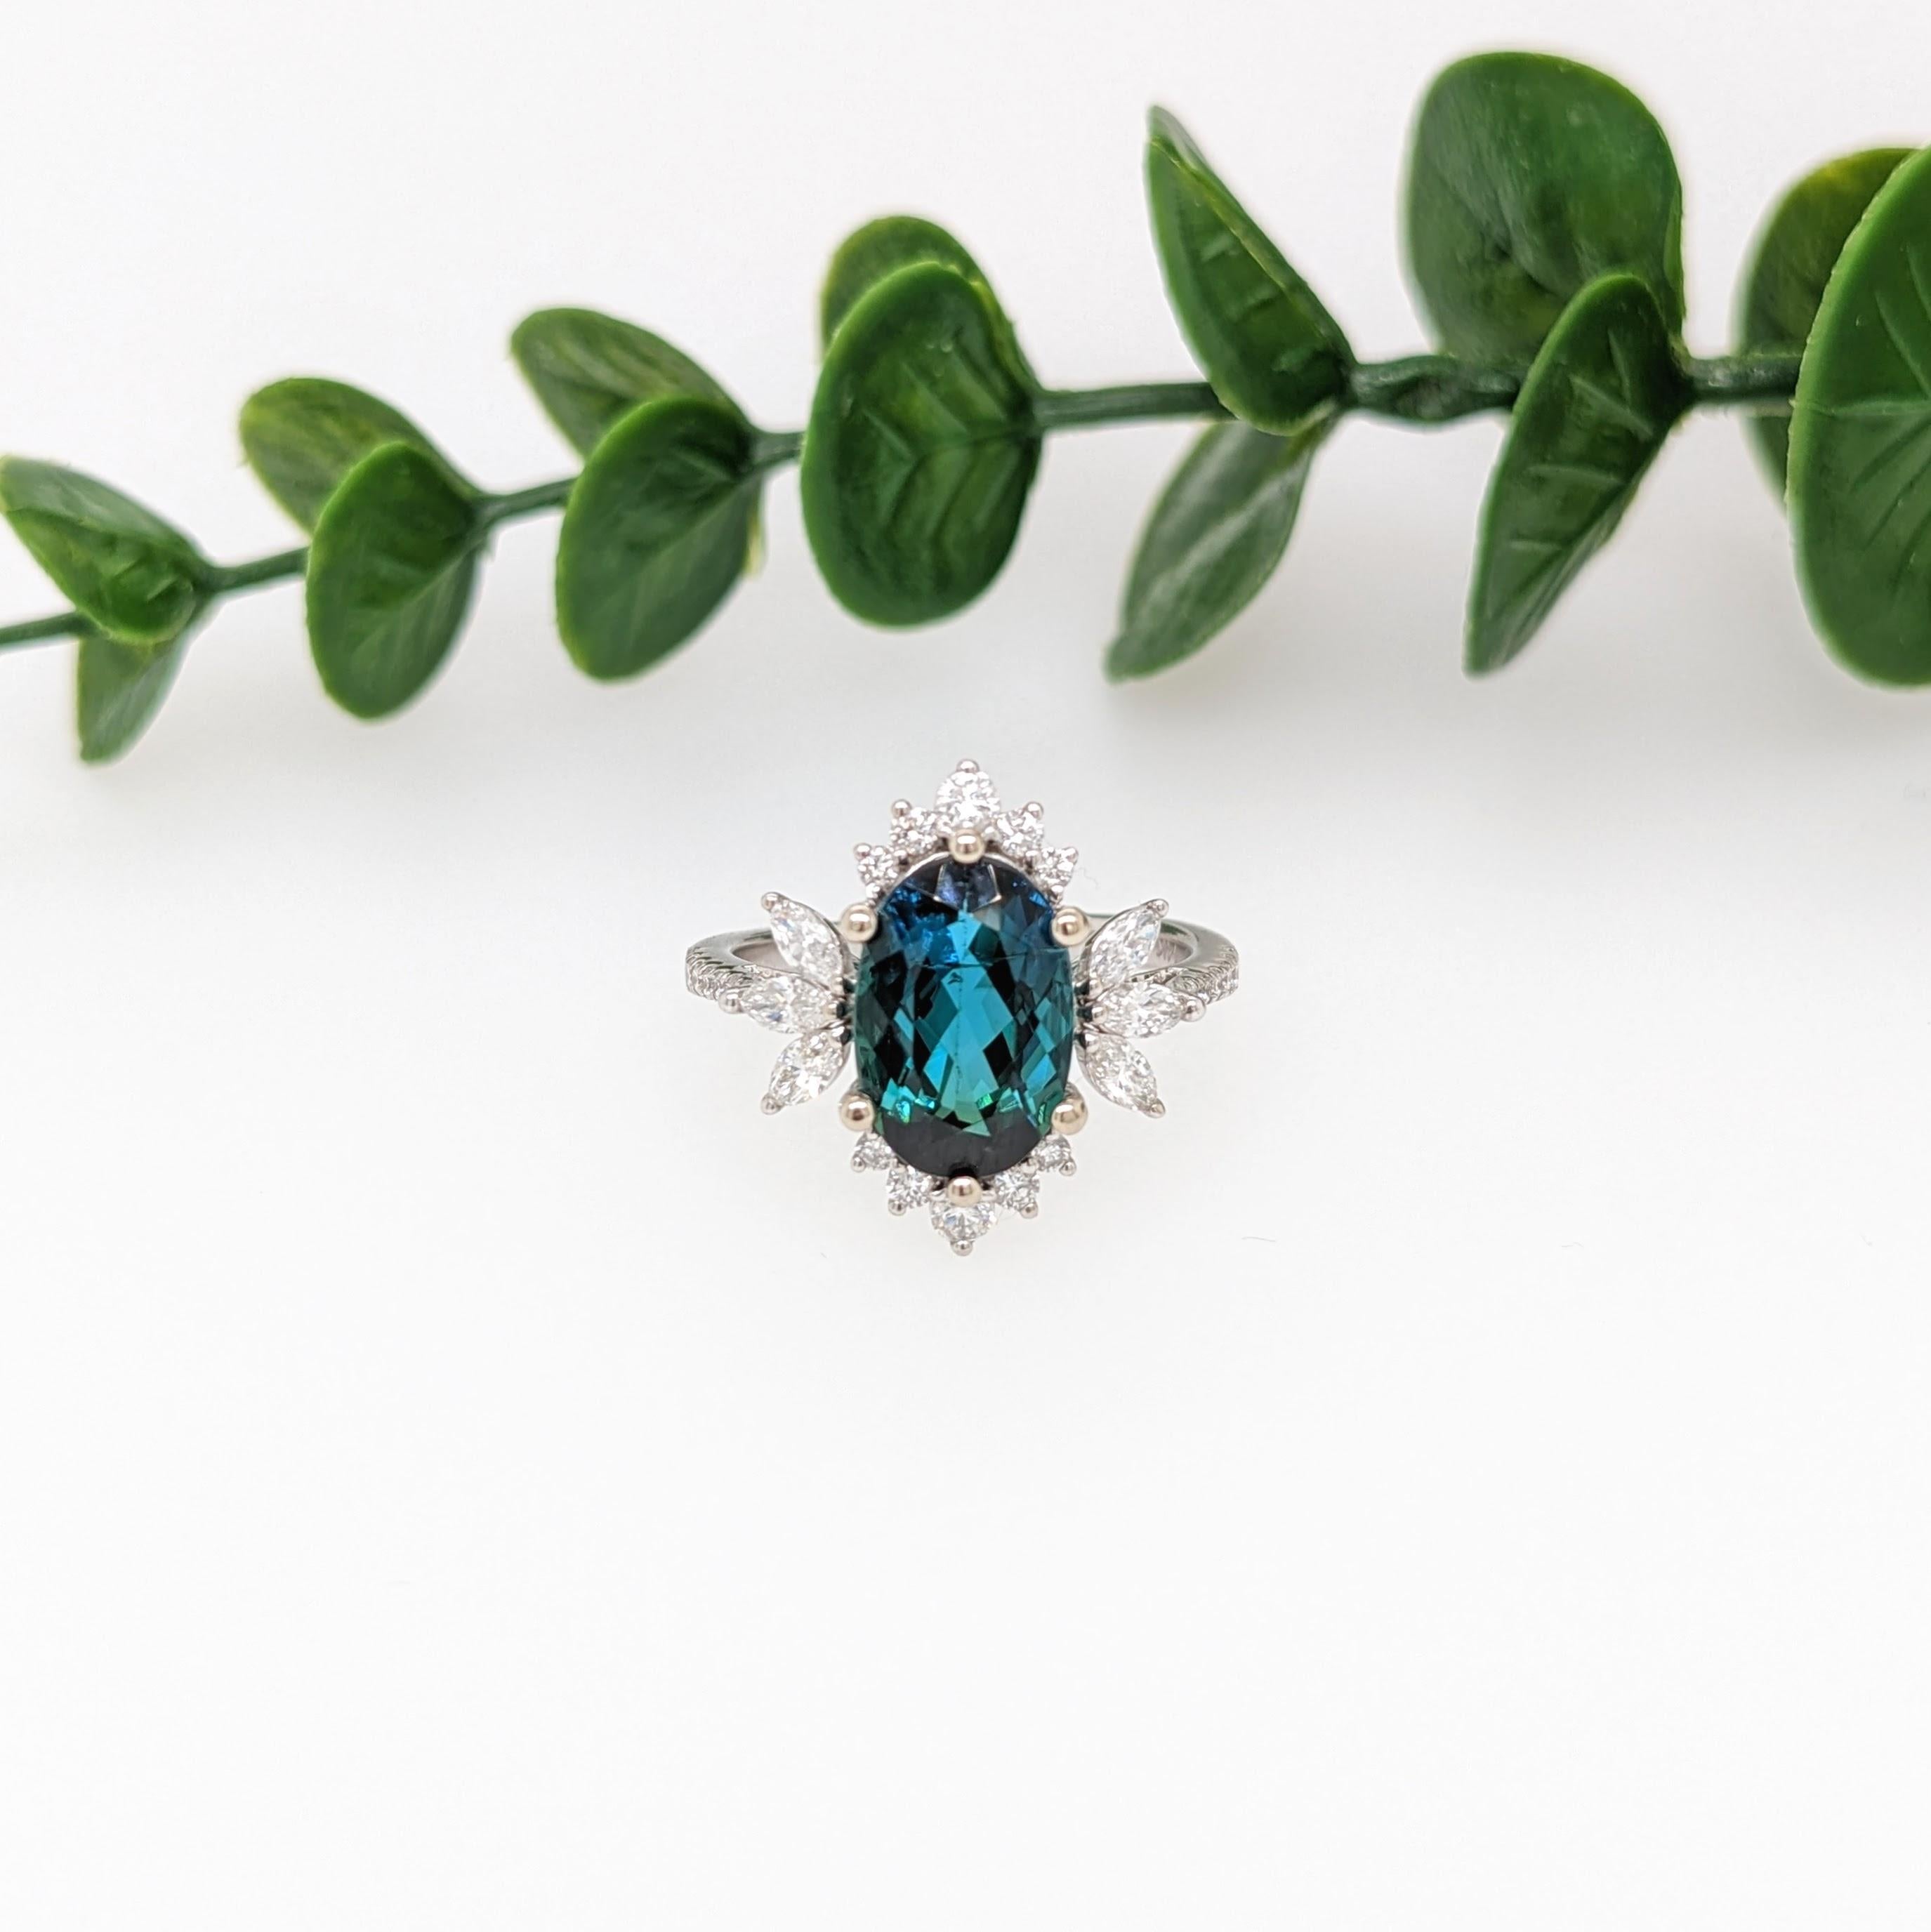 This gorgeous blue tourmaline ring is showcased in a custom NNJ ring design with sparkling round and marquise natural diamond accents that give an extra sparkle! With radiant diamonds surrounding an 11x7mm tourmaline, this piece is classy and